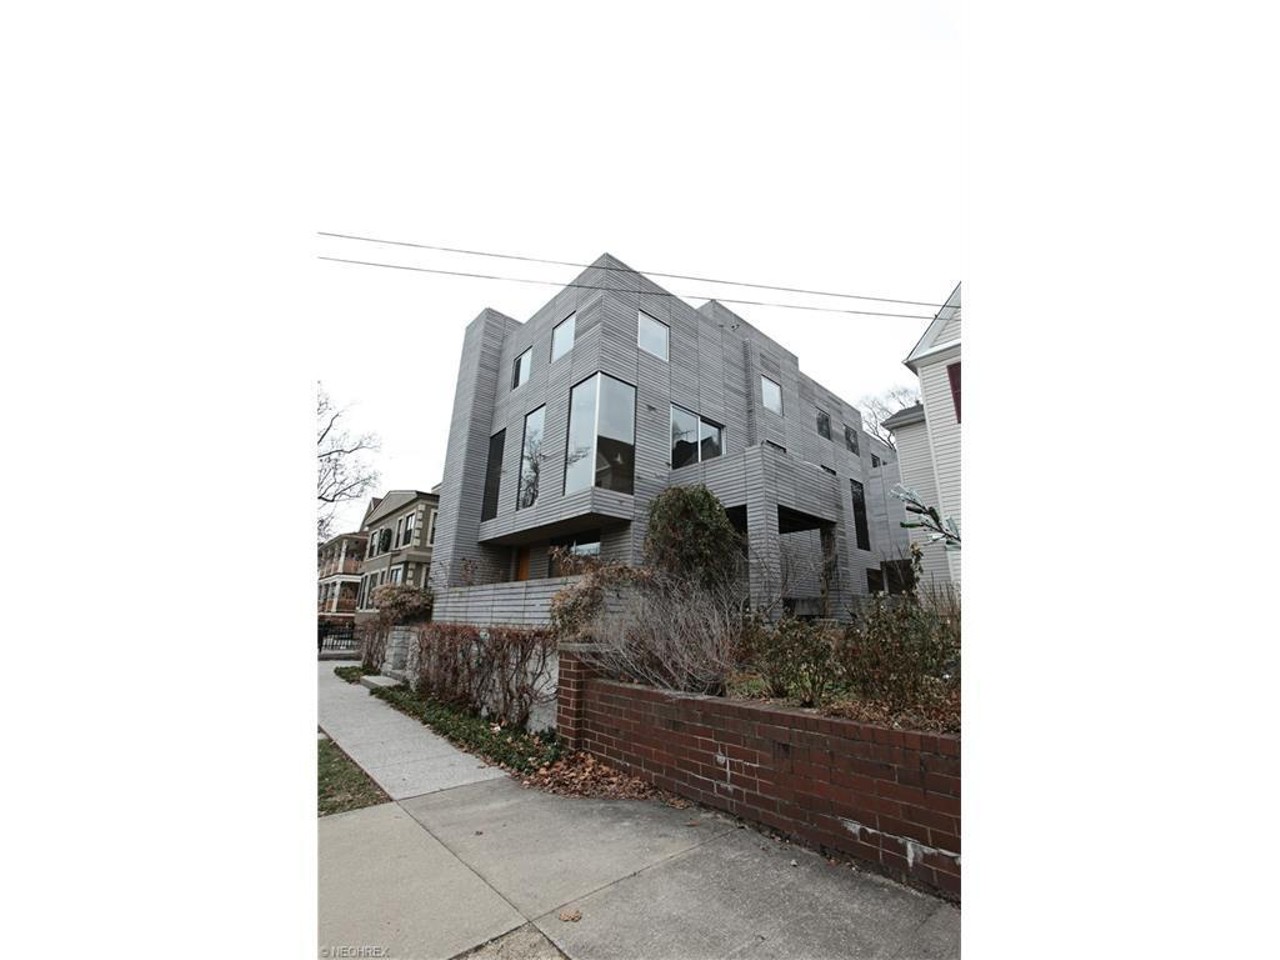  The &#147;Affordable&#148; One: 2041 Fairview Ave., Cleveland
$899,900
Here, in this modern-style detached row home located in Little Italy, you&#146;ll have more than 3737-square feet of thoughtfully laid out and designed space to work with. Plus, you won&#146;t even have to pay a million dollars to buy this.
Photos via Redfin